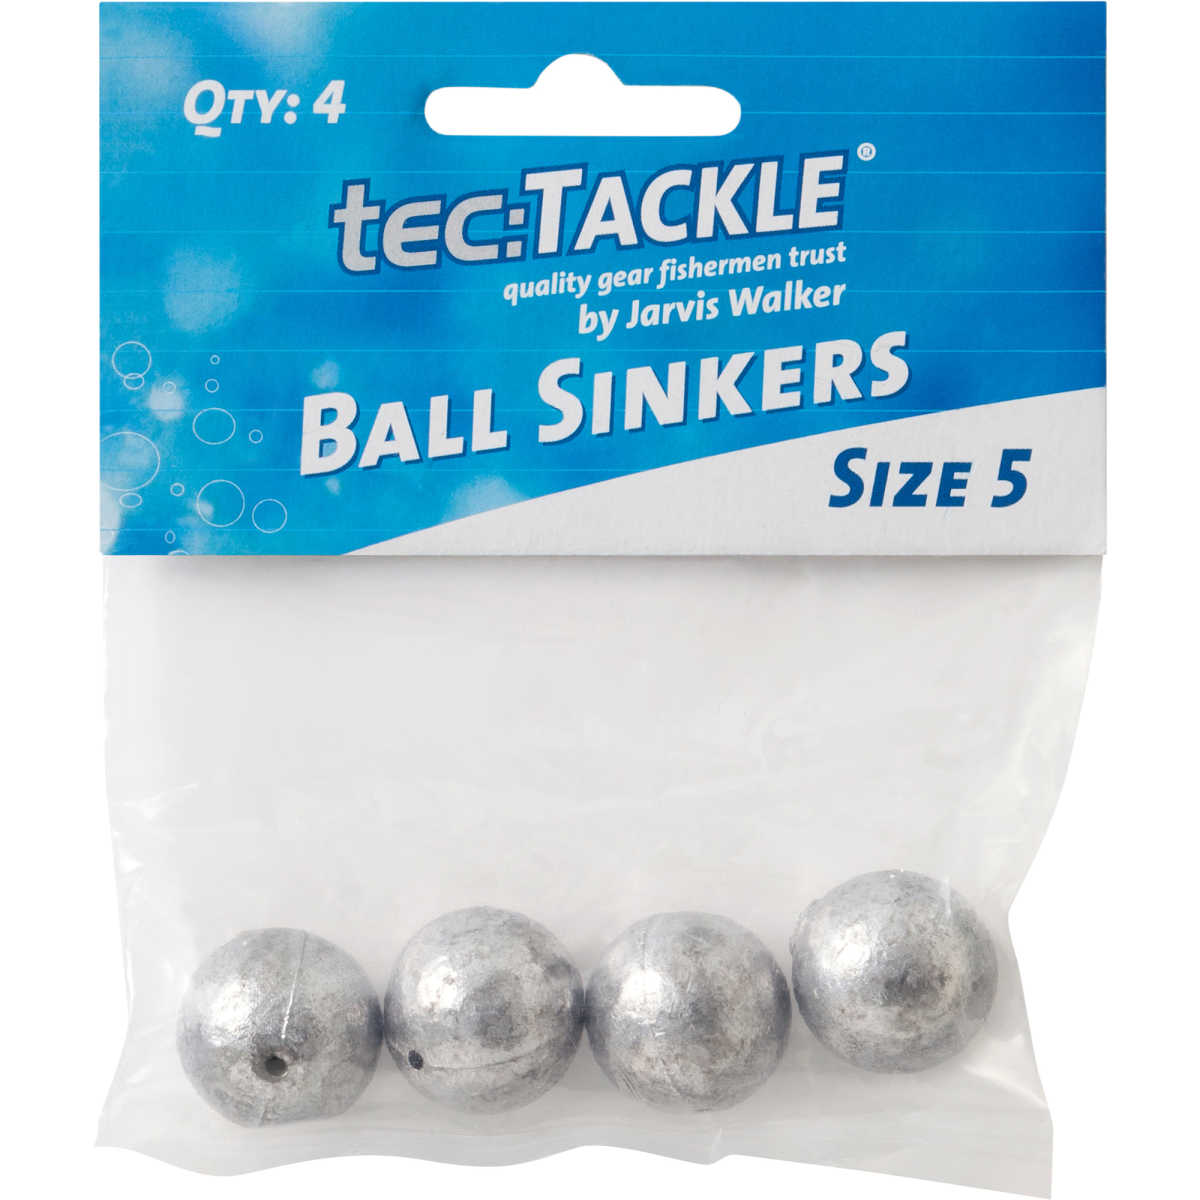 Tec:Tackle Ball Sinker Size 5 Qty 4 -  - Mansfield Hunting & Fishing - Products to prepare for Corona Virus